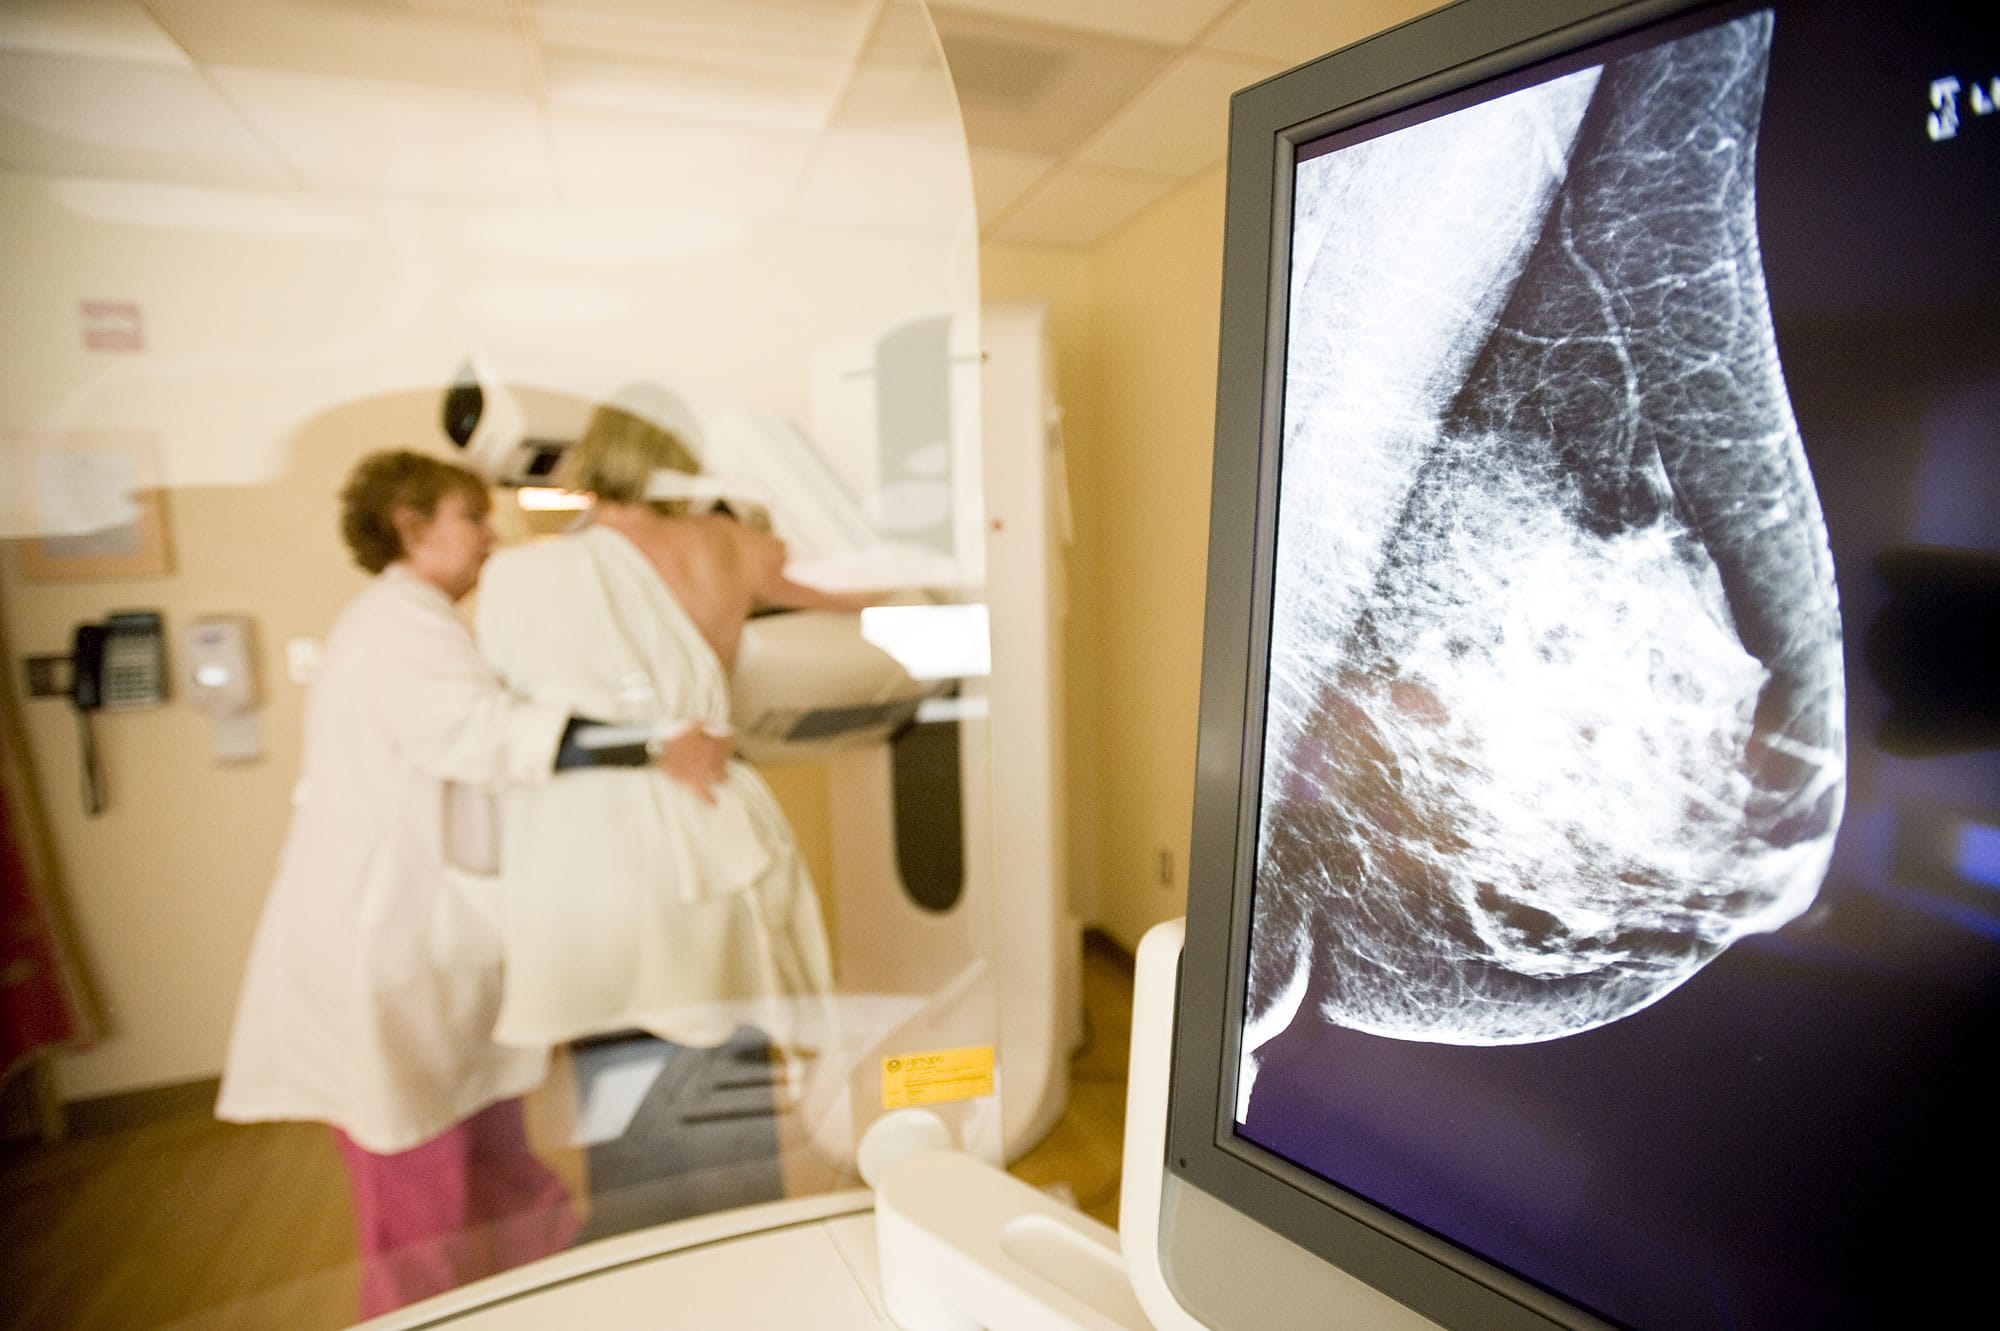 Leslie Dykman, lead mammography technologist at PeaceHealth Southwest Medical Center's Kearney Breast Center, performs a 3-D mammogram on a patient in March 2012.